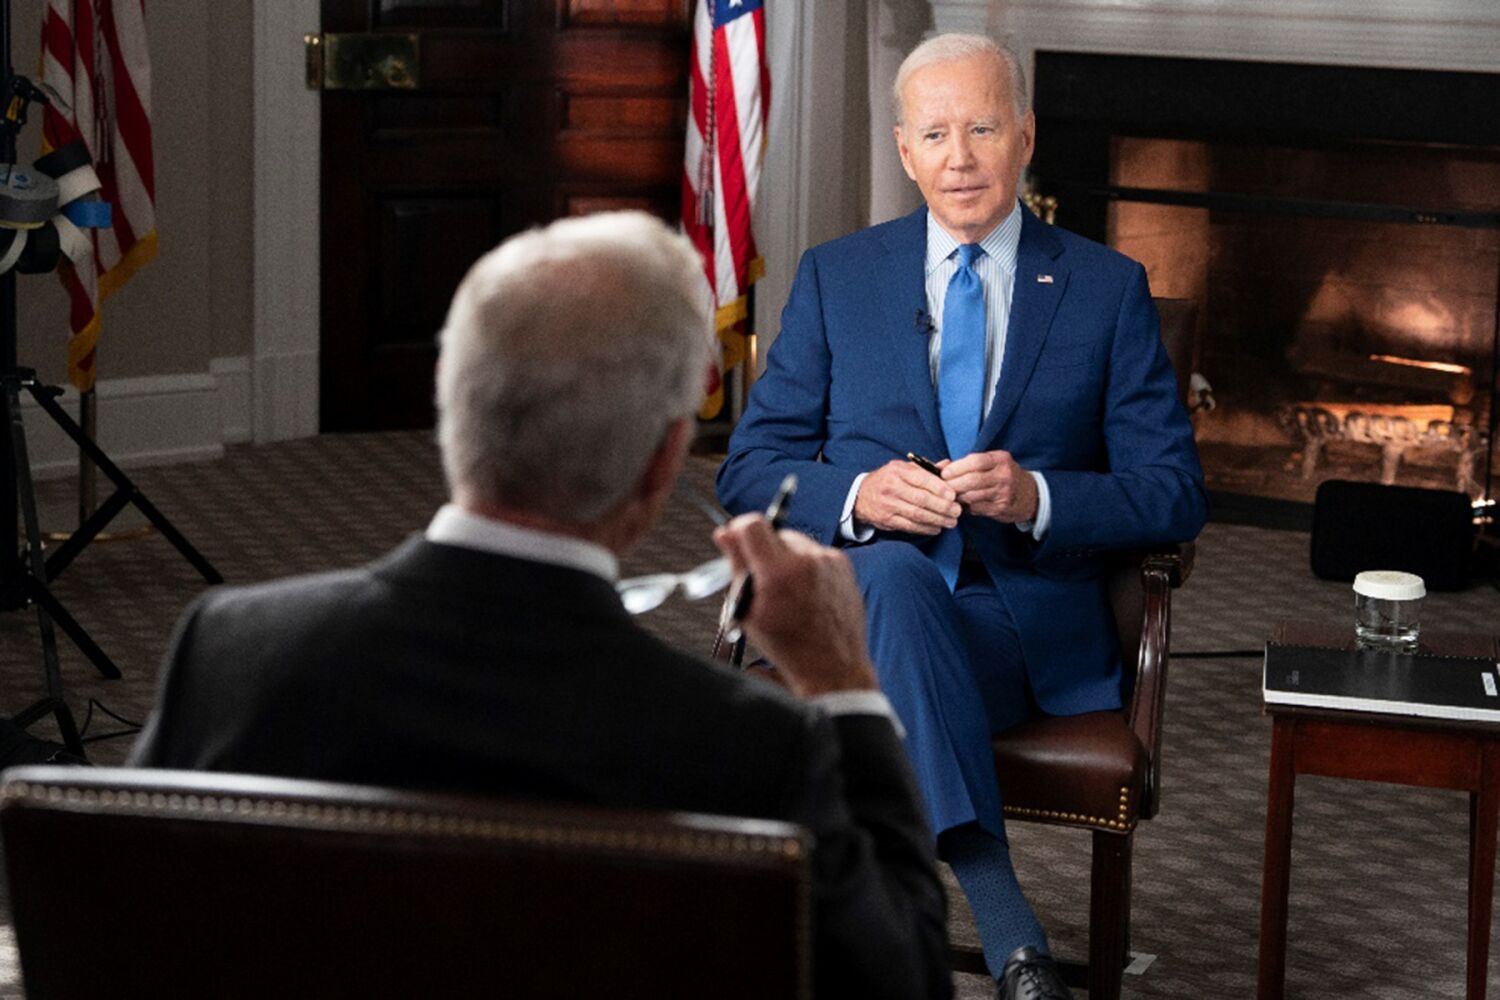 Biden sent the wrong message on COVID. He can still fix it